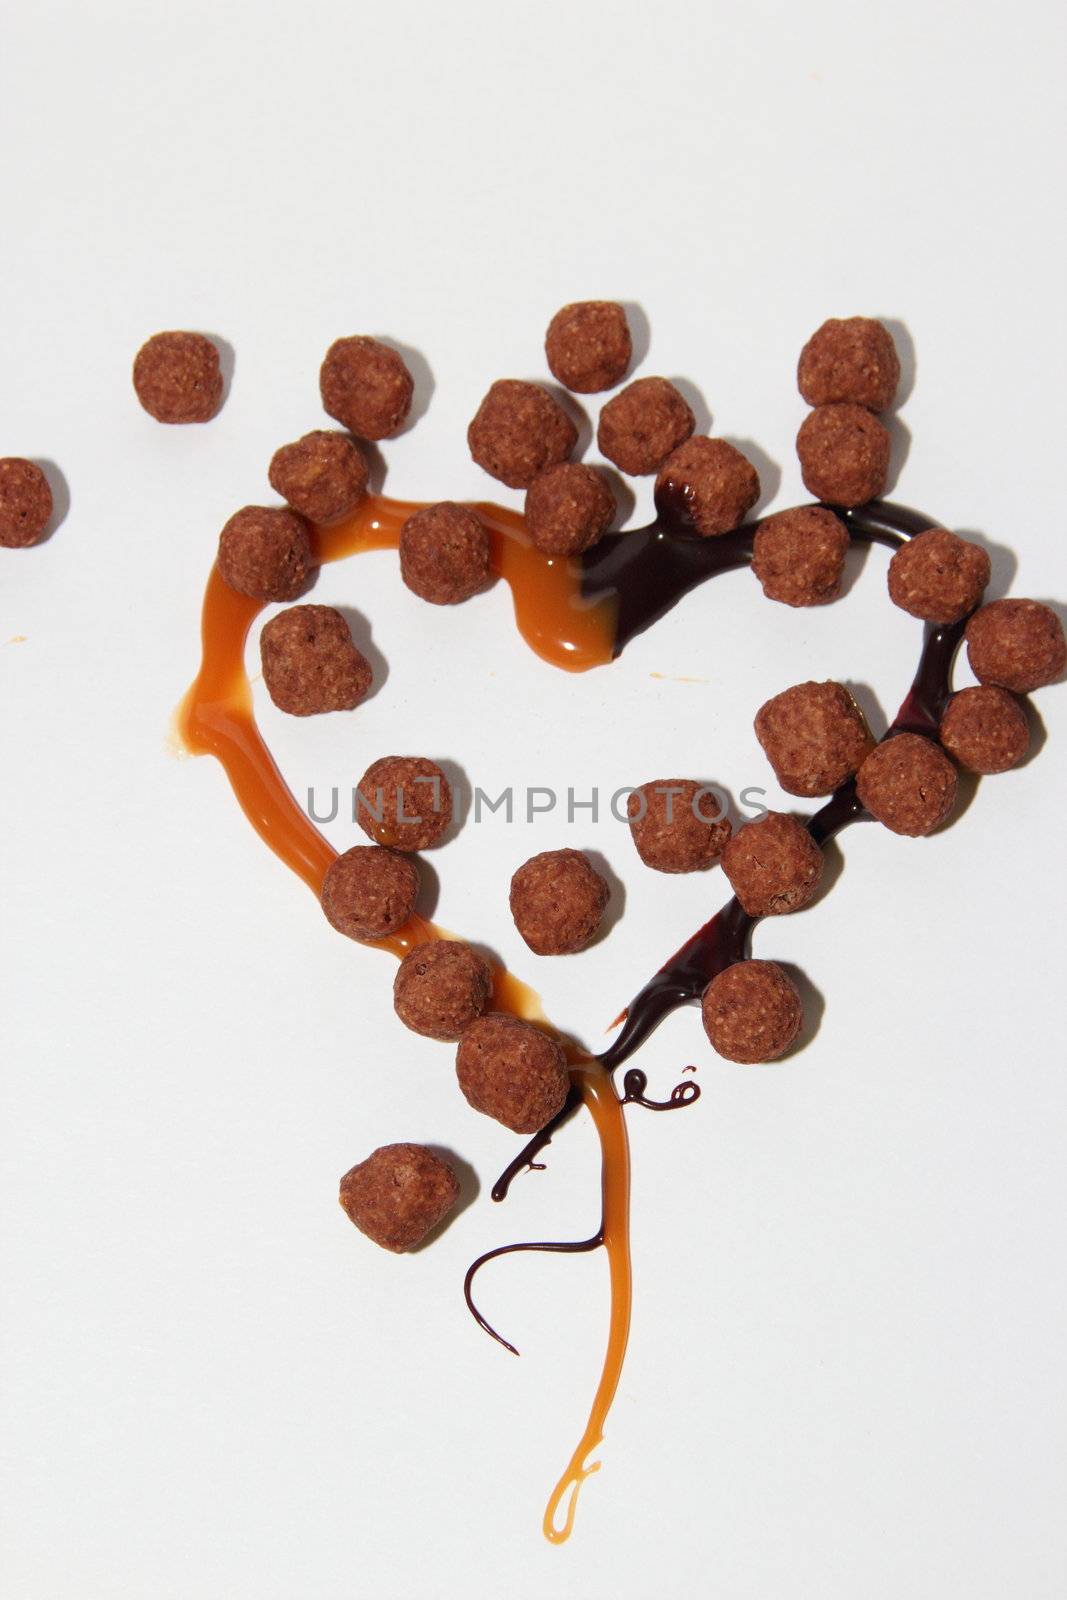 heart of caramel, chocolate and balls by Metanna